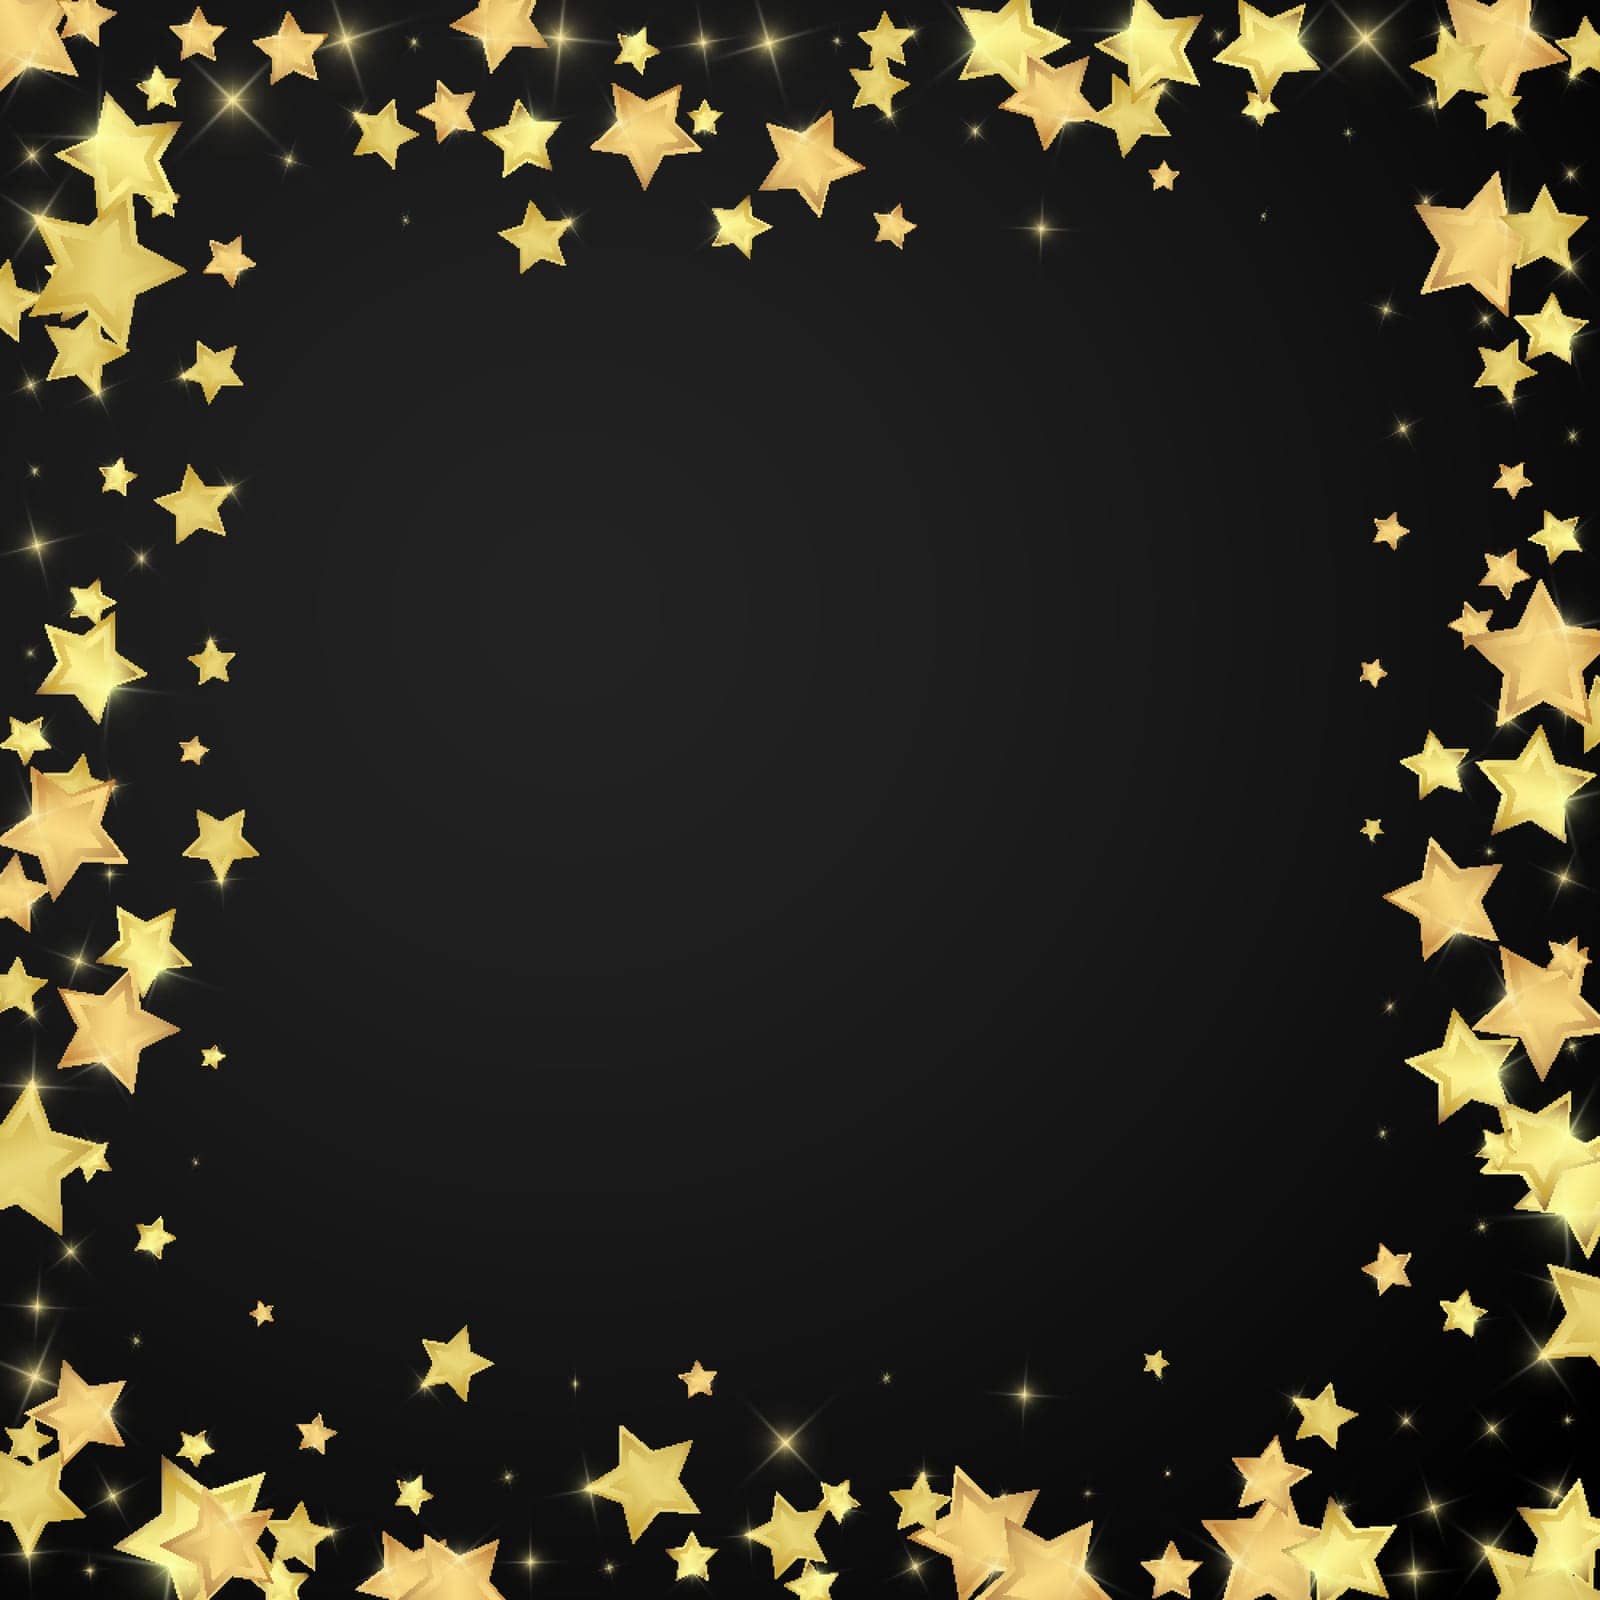 Magic stars vector overlay. Gold stars scattered by beginagain